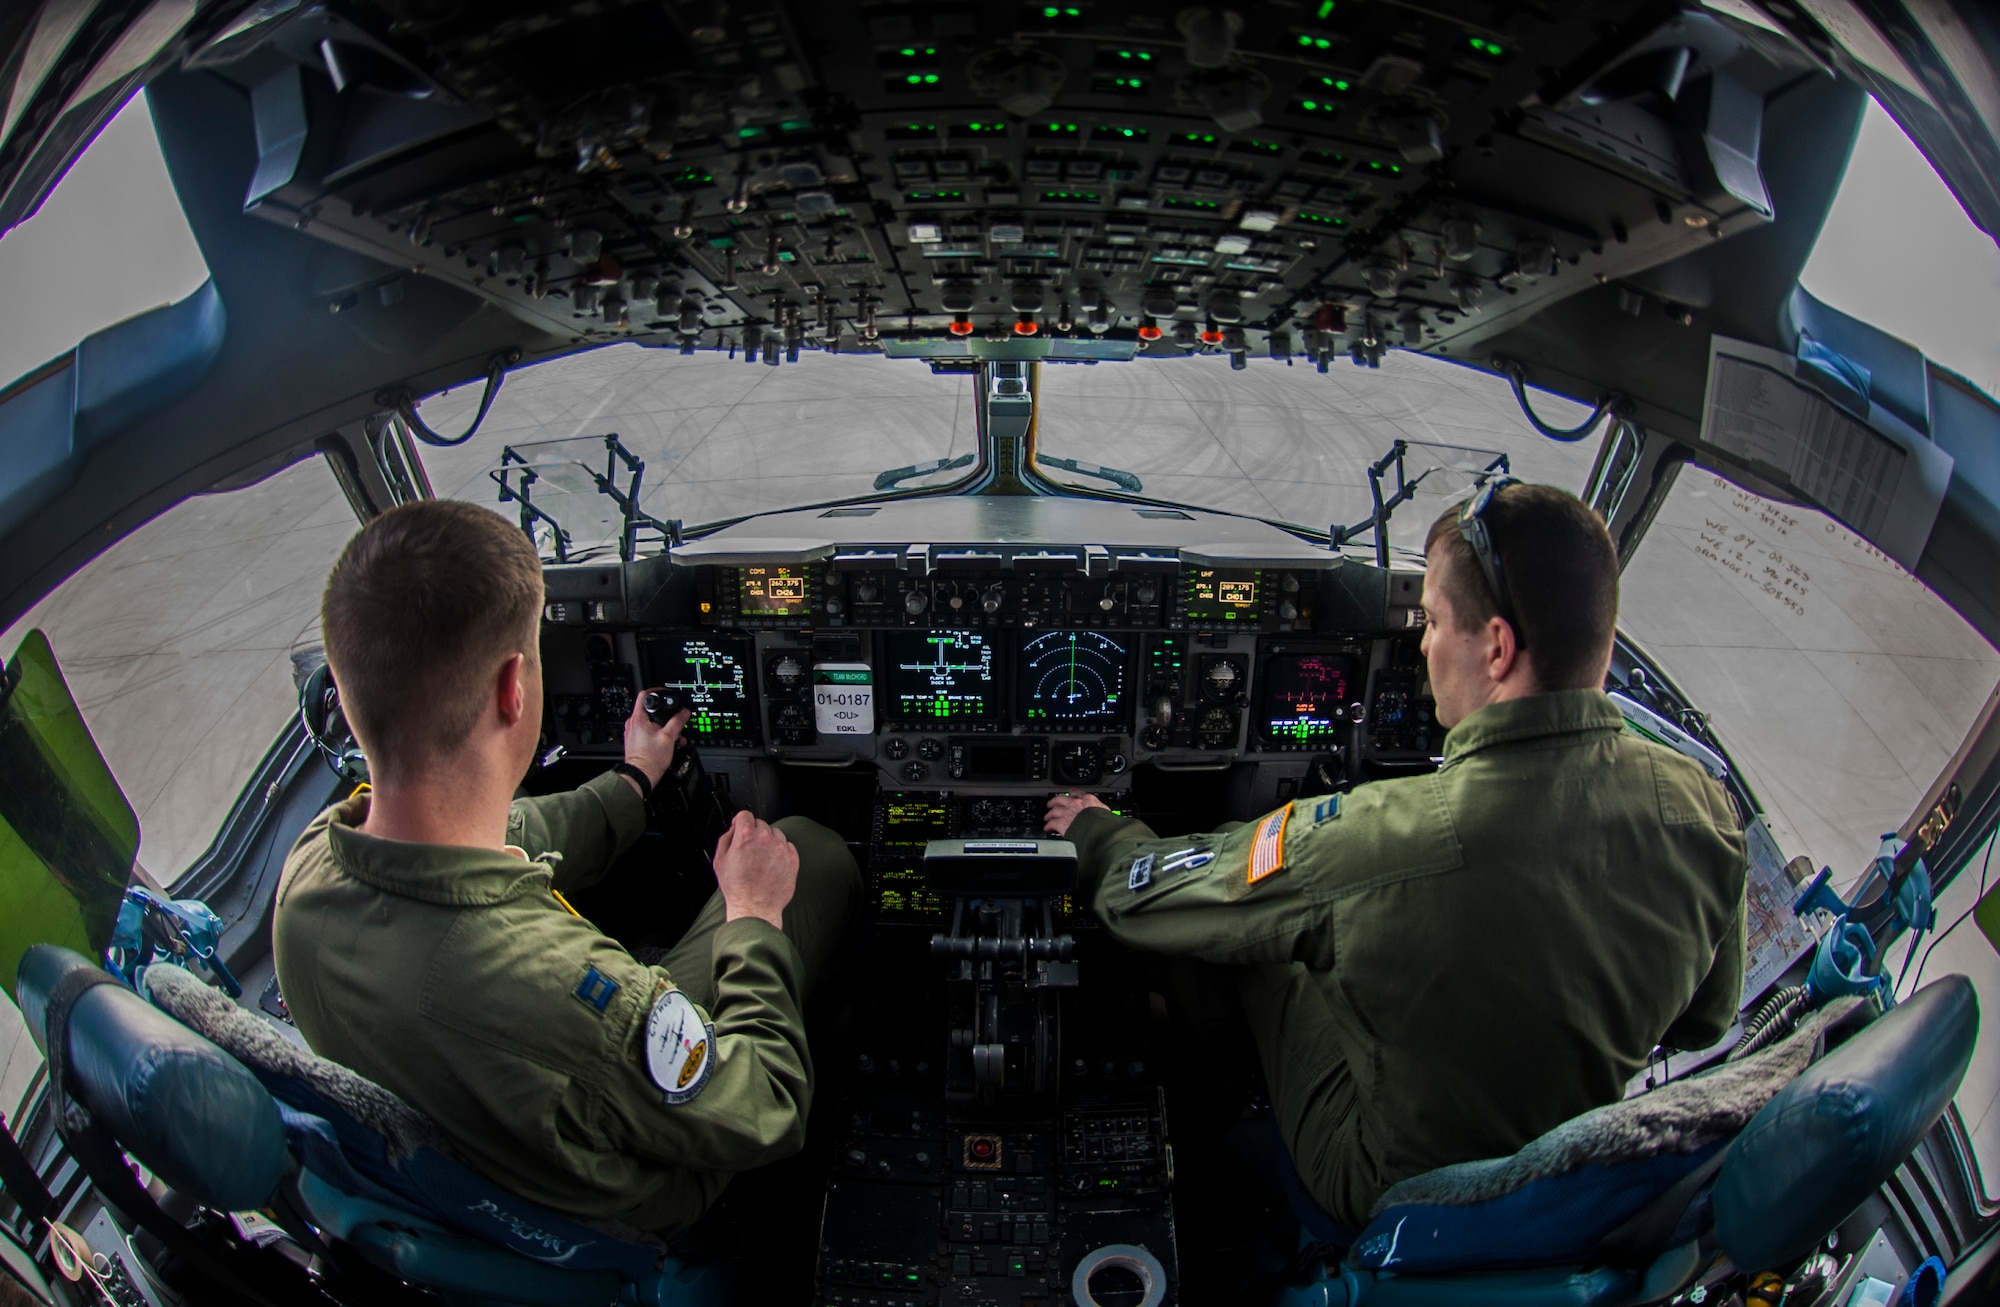 Capt. Mike “Havac” Gilpatrick, a pilot assigned to the 9th Airlift Squadron, Joint Base McGuire-Dix-Lakehurst, N.J., and Capt. Jason “Brick” Sewell, a pilot assigned to the 43rd Operation Support Squadron, Pope Air Force Base, N.C., prepare a C-17 Globemaster III for take-off before a joint forcible entry exercise at Nellis Air Force Base, Nev., Dec. 10, 2016. JFEX is a U.S. Air Force Weapons School large-scale air mobility exercise in which participants plan and execute a complex air-land operation in a simulated contested battlefield. (U.S. Air Force photo by Airman 1st Class Kevin Tanenbaum)